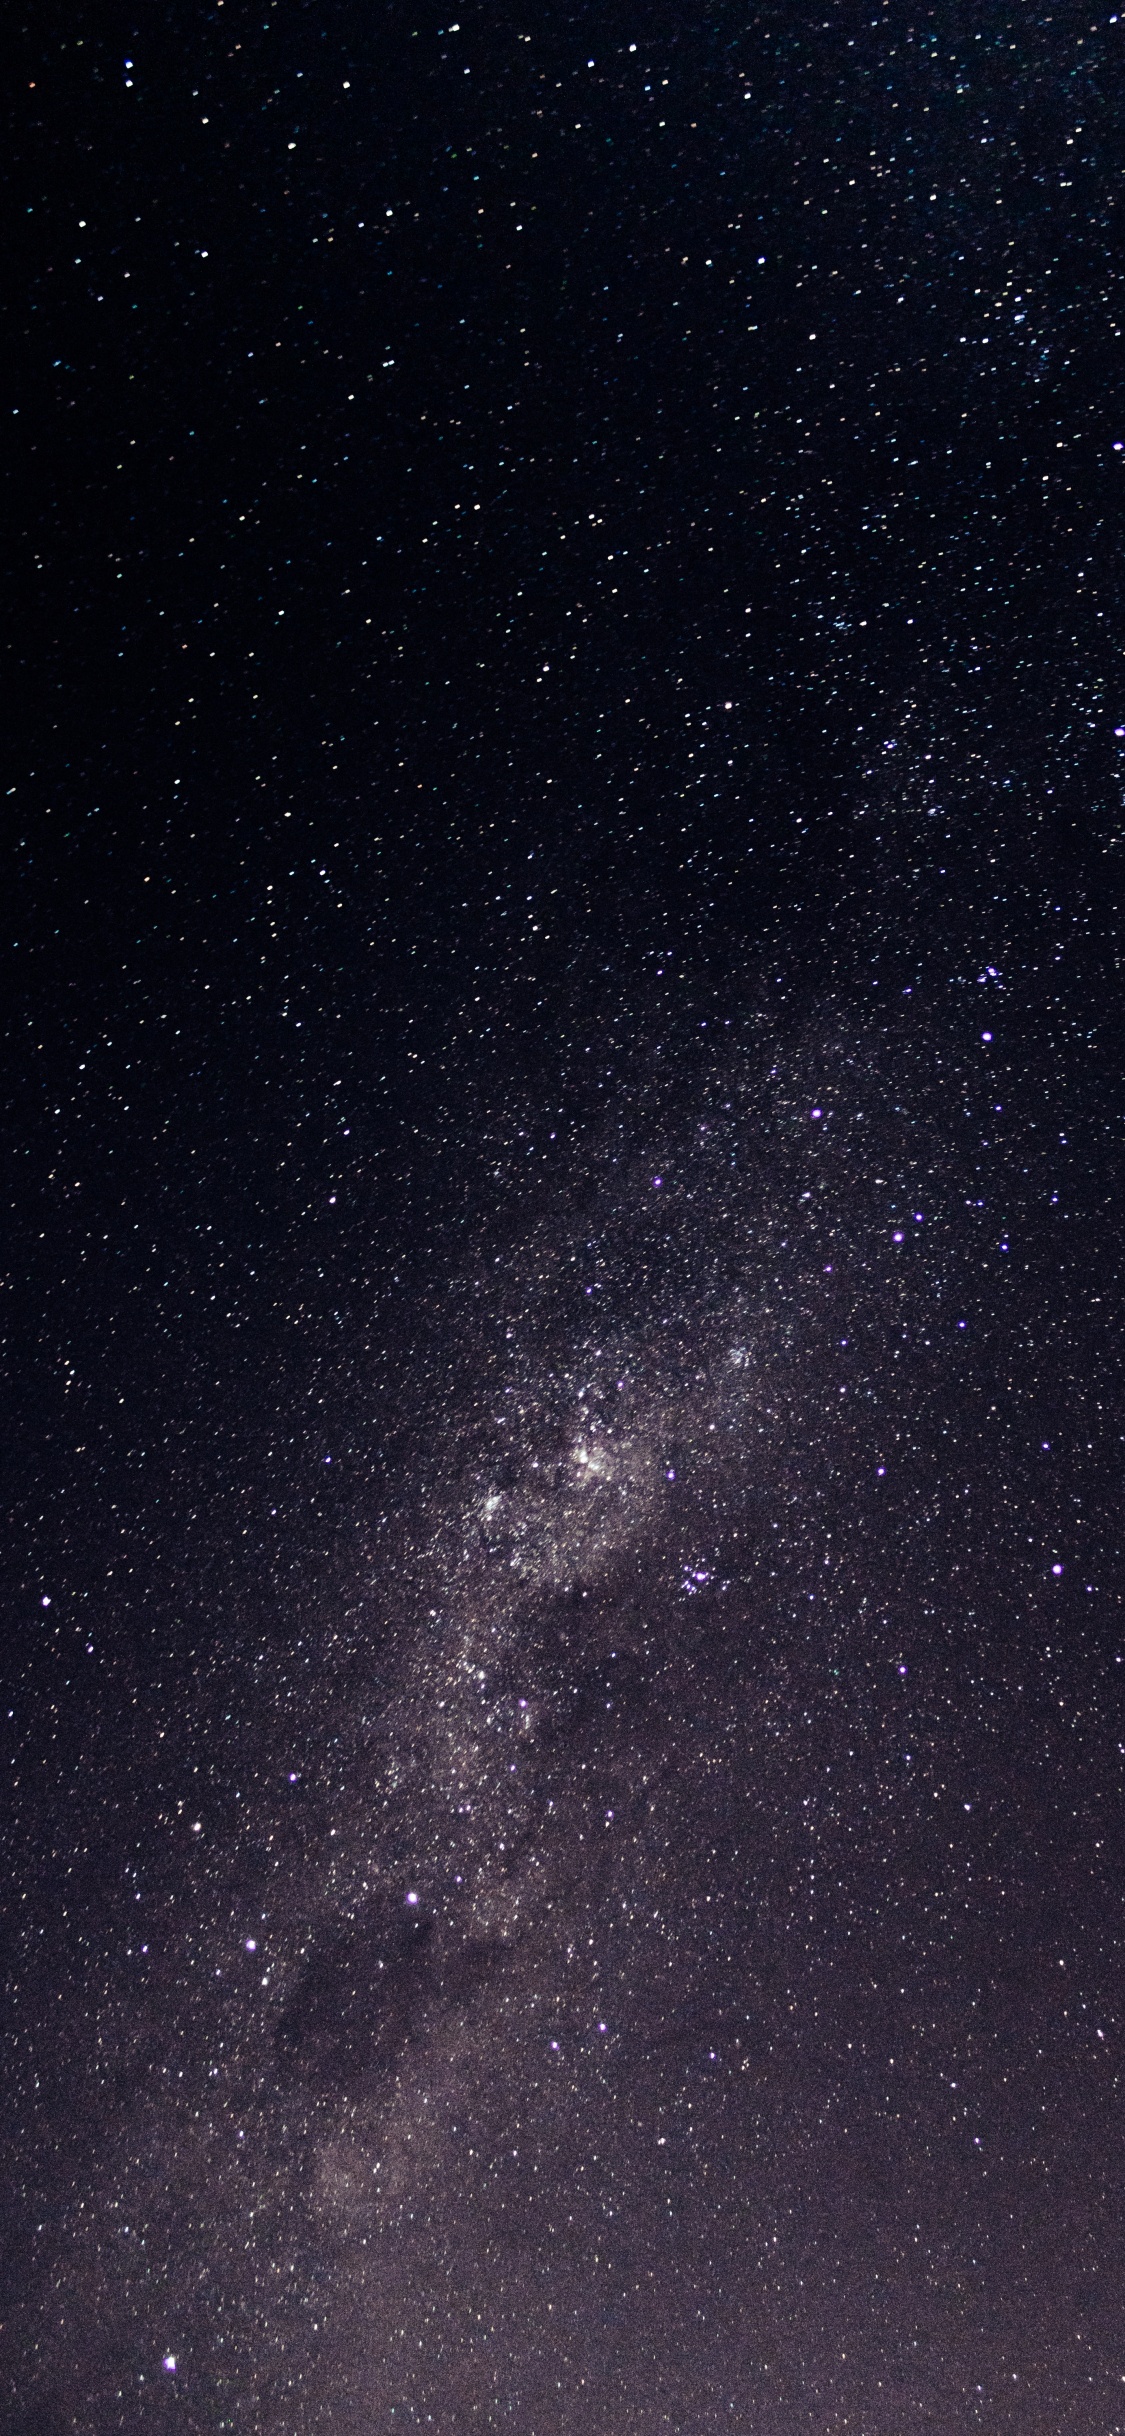 Starry Night Sky Over Starry Night. Wallpaper in 1125x2436 Resolution